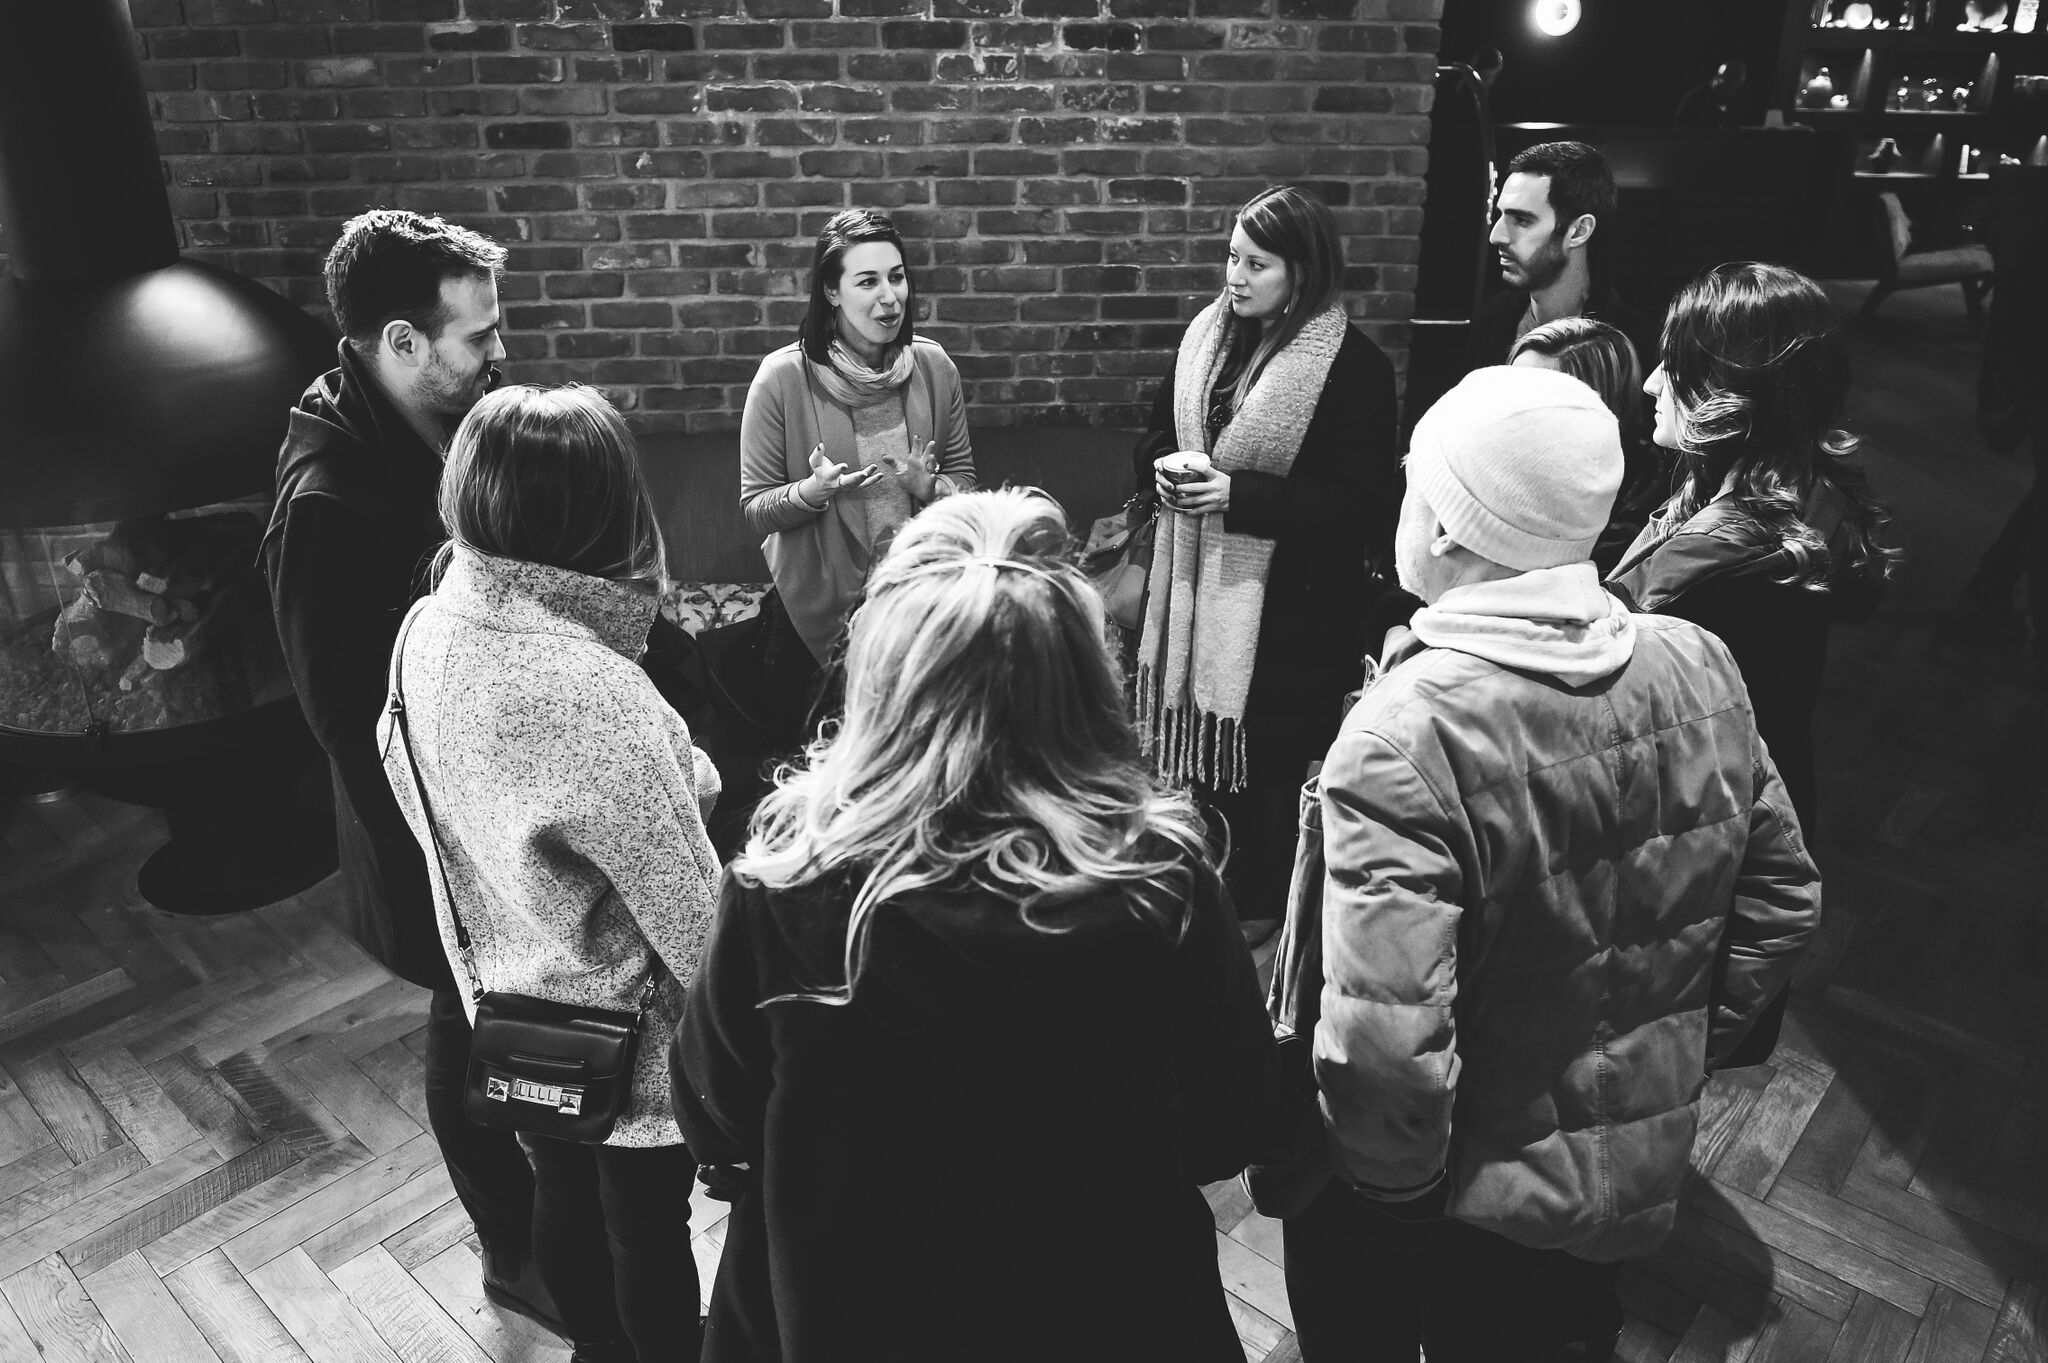 10 Team Building Icebreakers About Food And Why To Ask Them: our guides always start with an ice breaker